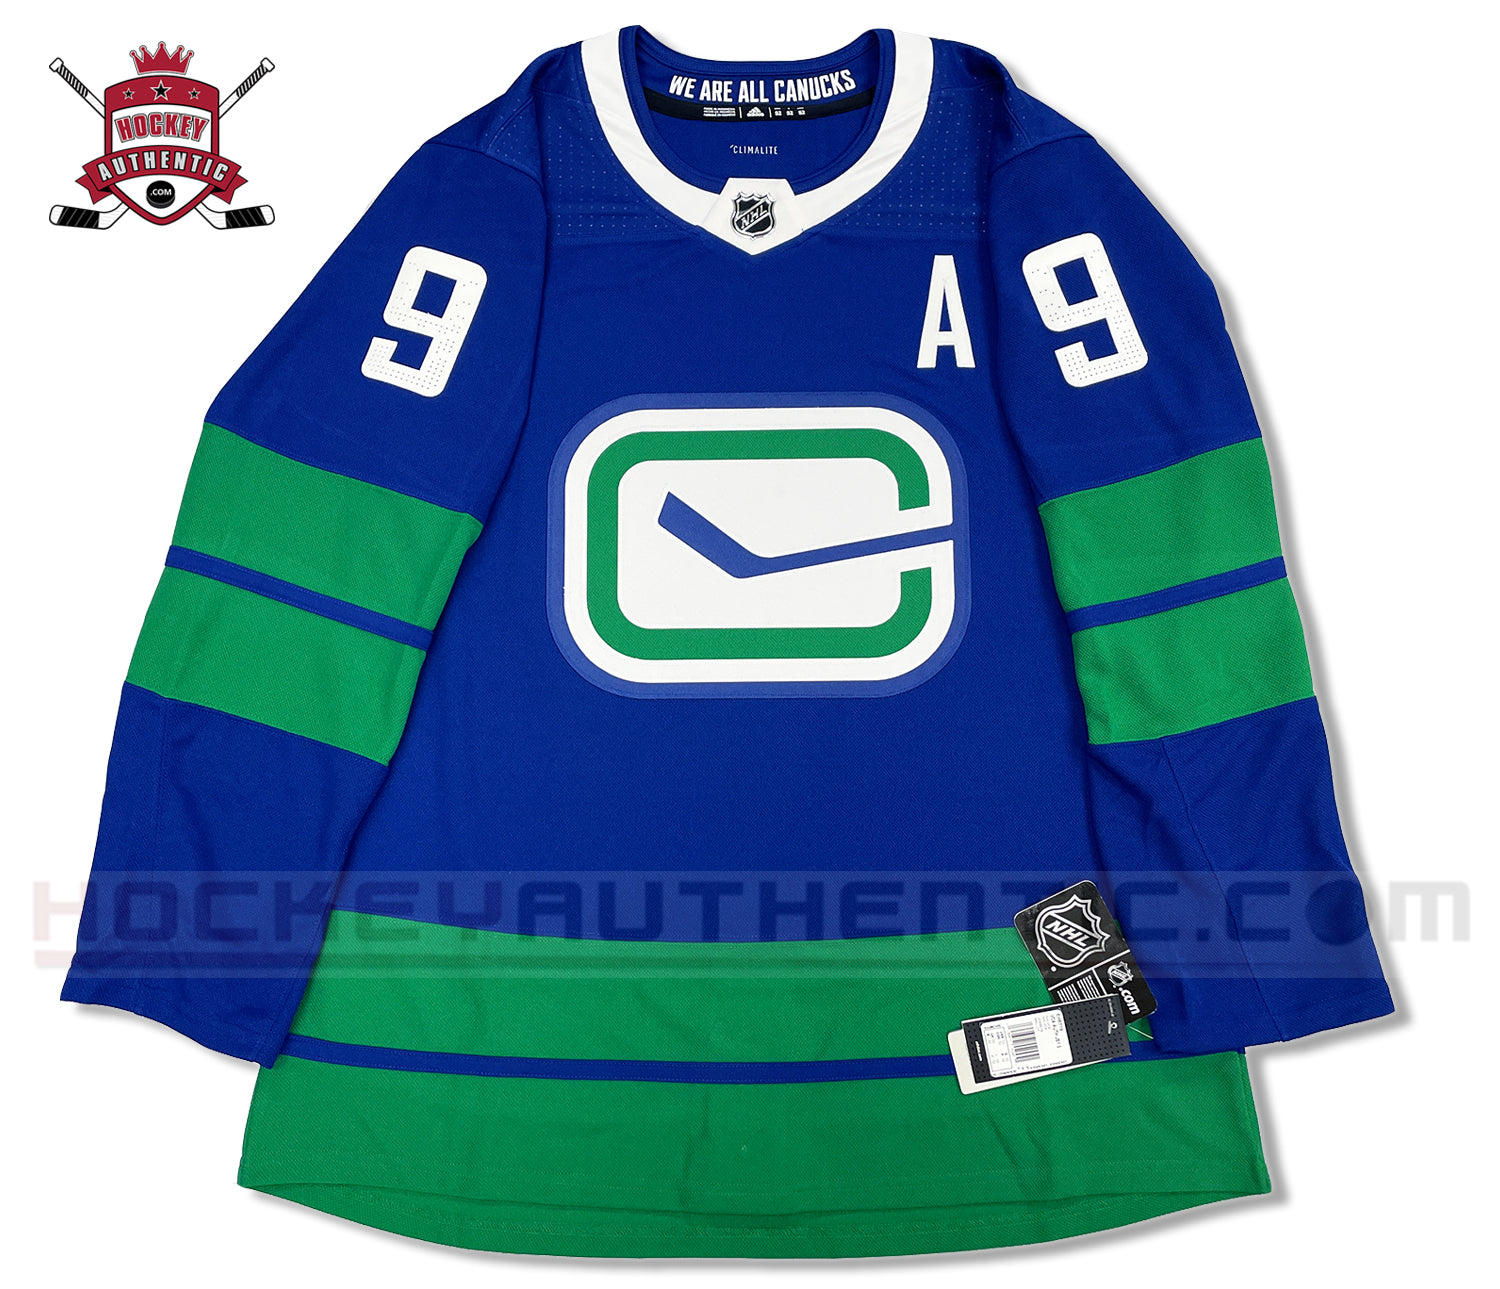 Adidas NHL Vancouver Canucks Home Authentic Pro Jersey - NHL from